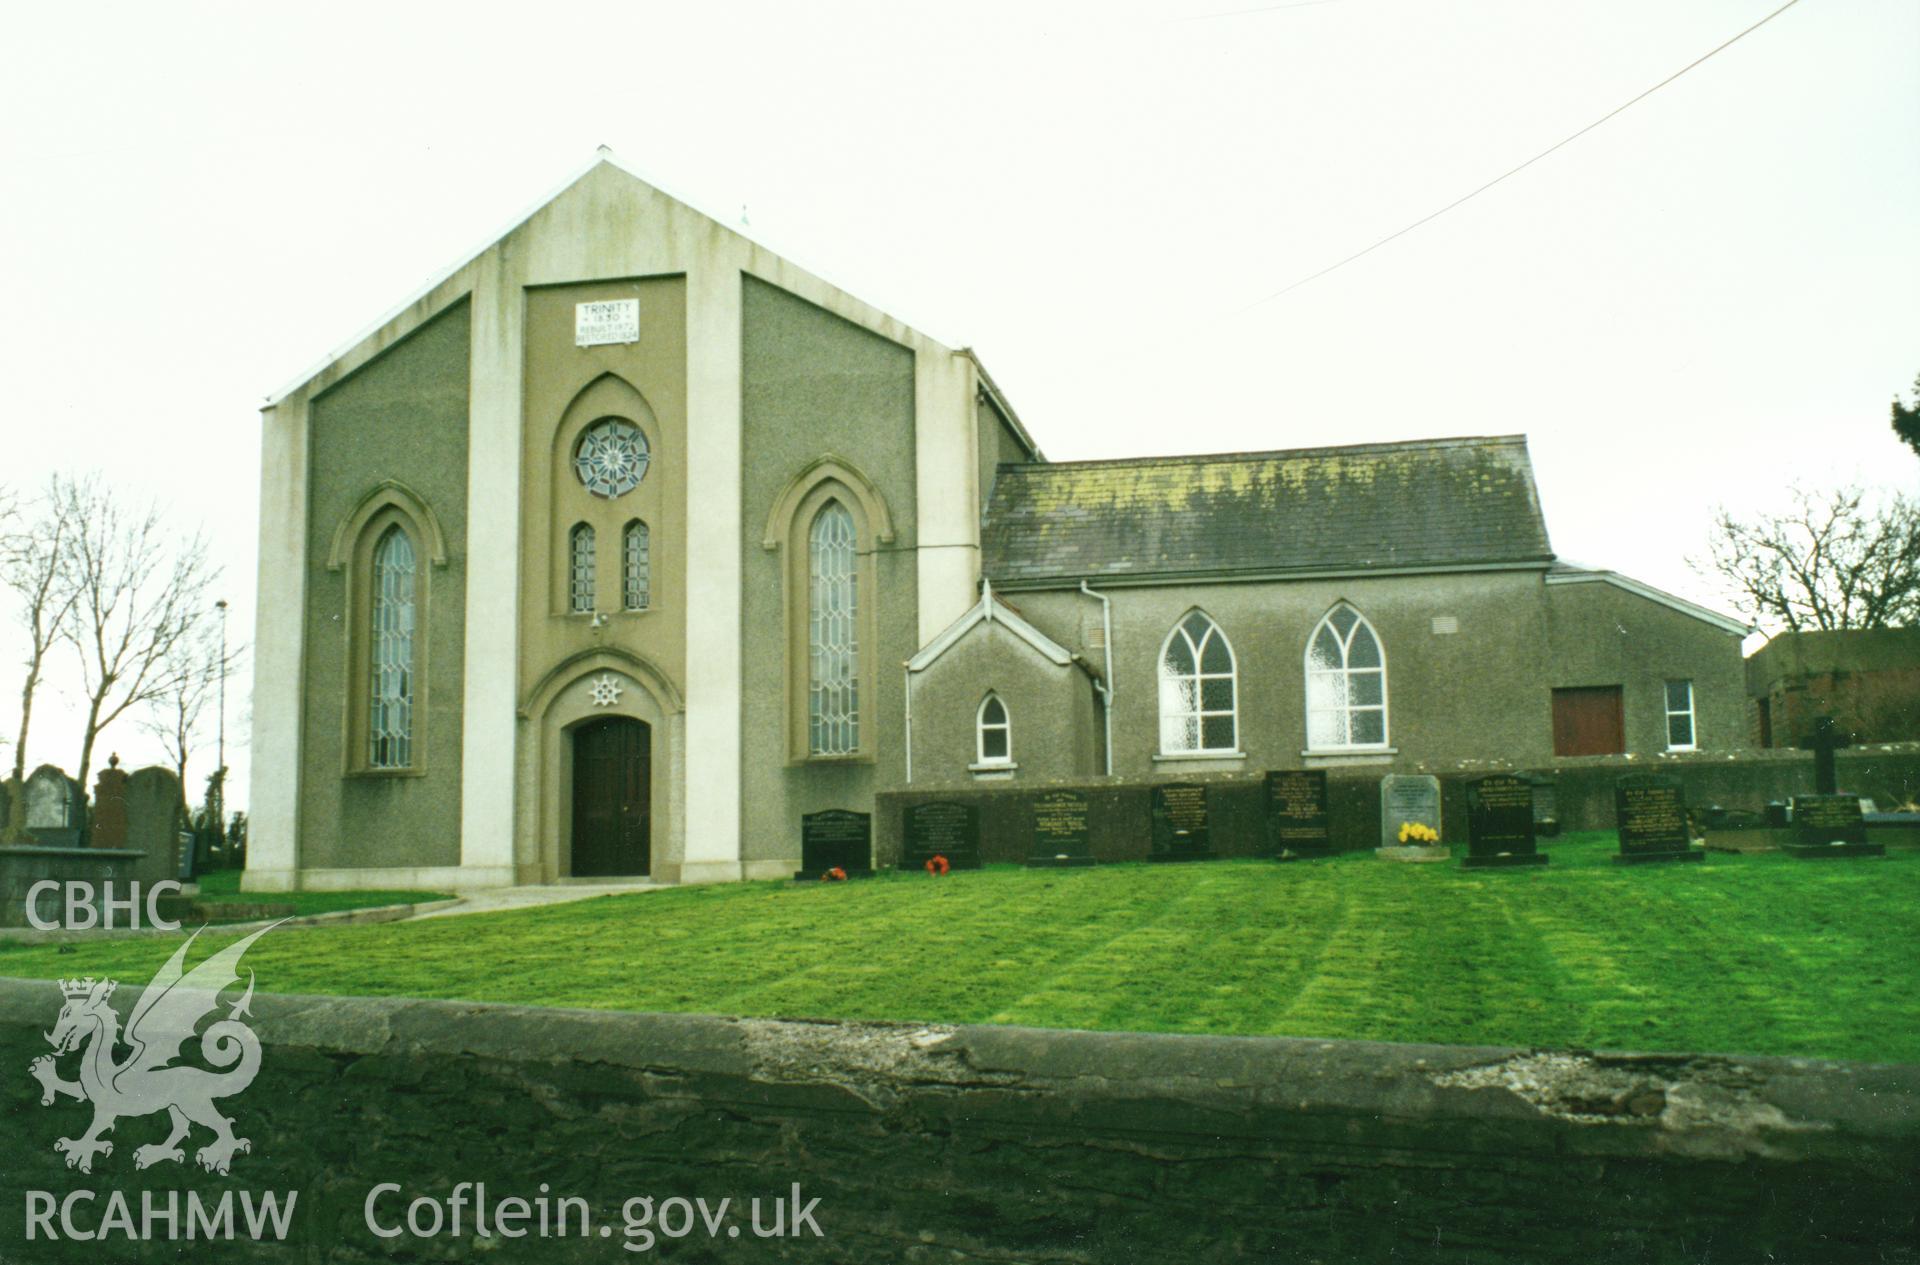 Digital copy of a colour photograph showing an exterior view of Trinity Welsh Calvinistic Methodist Chapel, St Clears, taken by Robert Scourfield, 1996.